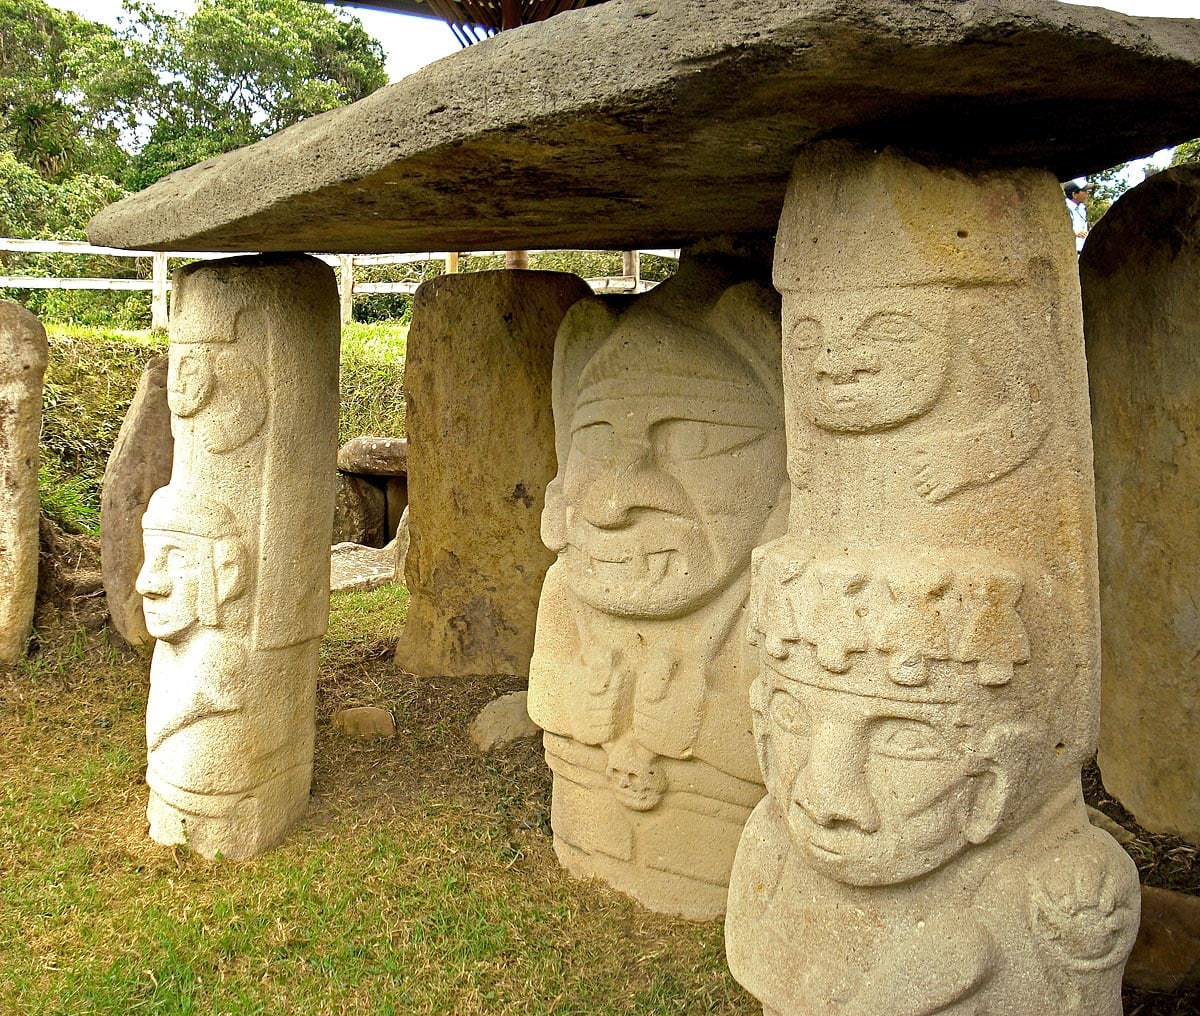 Statues in San Agustin, Colombia